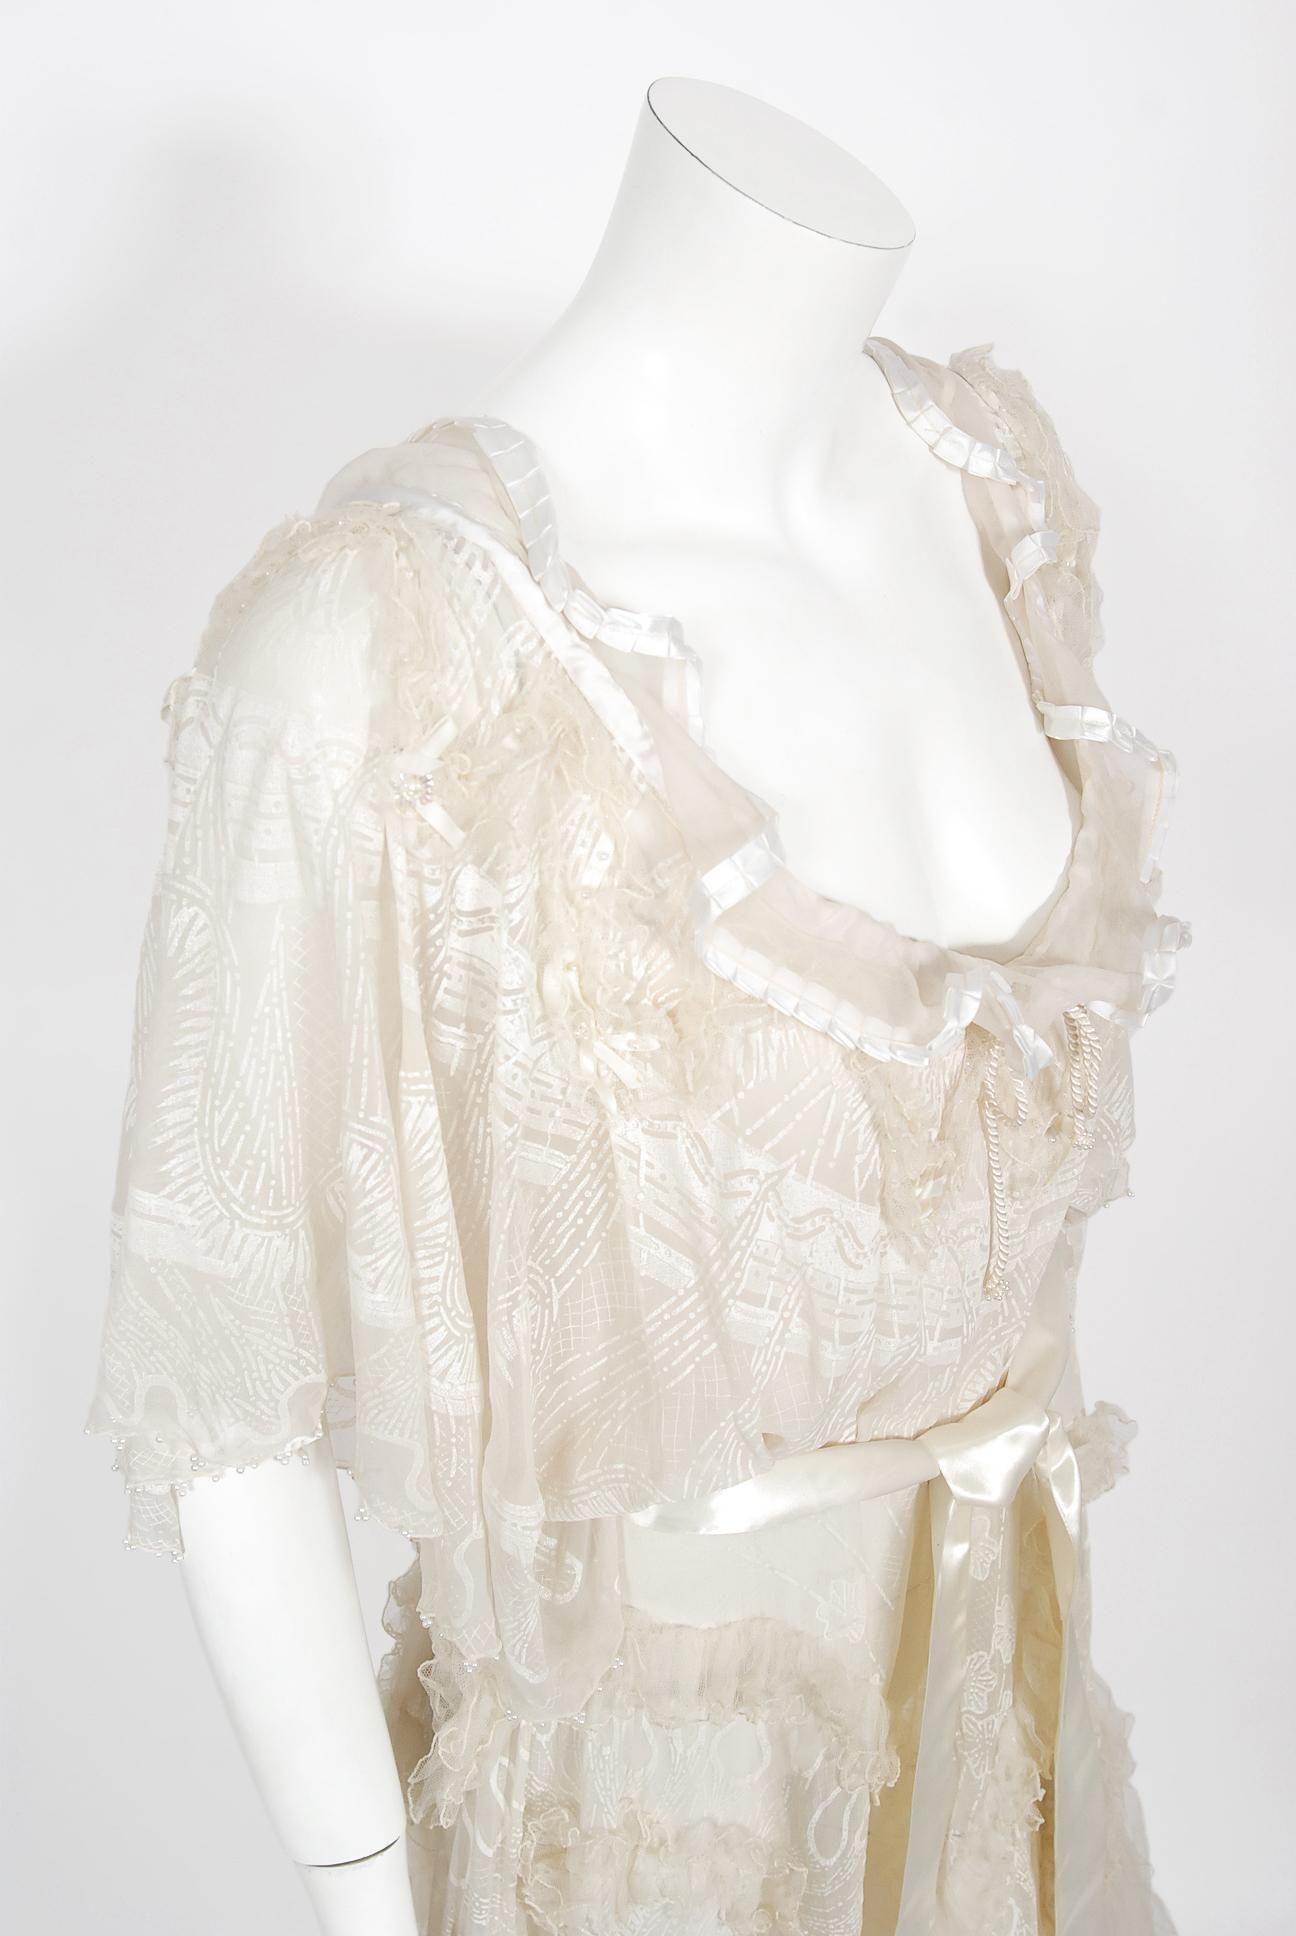 Vintage 1973 Zandra Rhodes Couture Hand Painted Ivory Sheer Chiffon & Tulle Gown 9